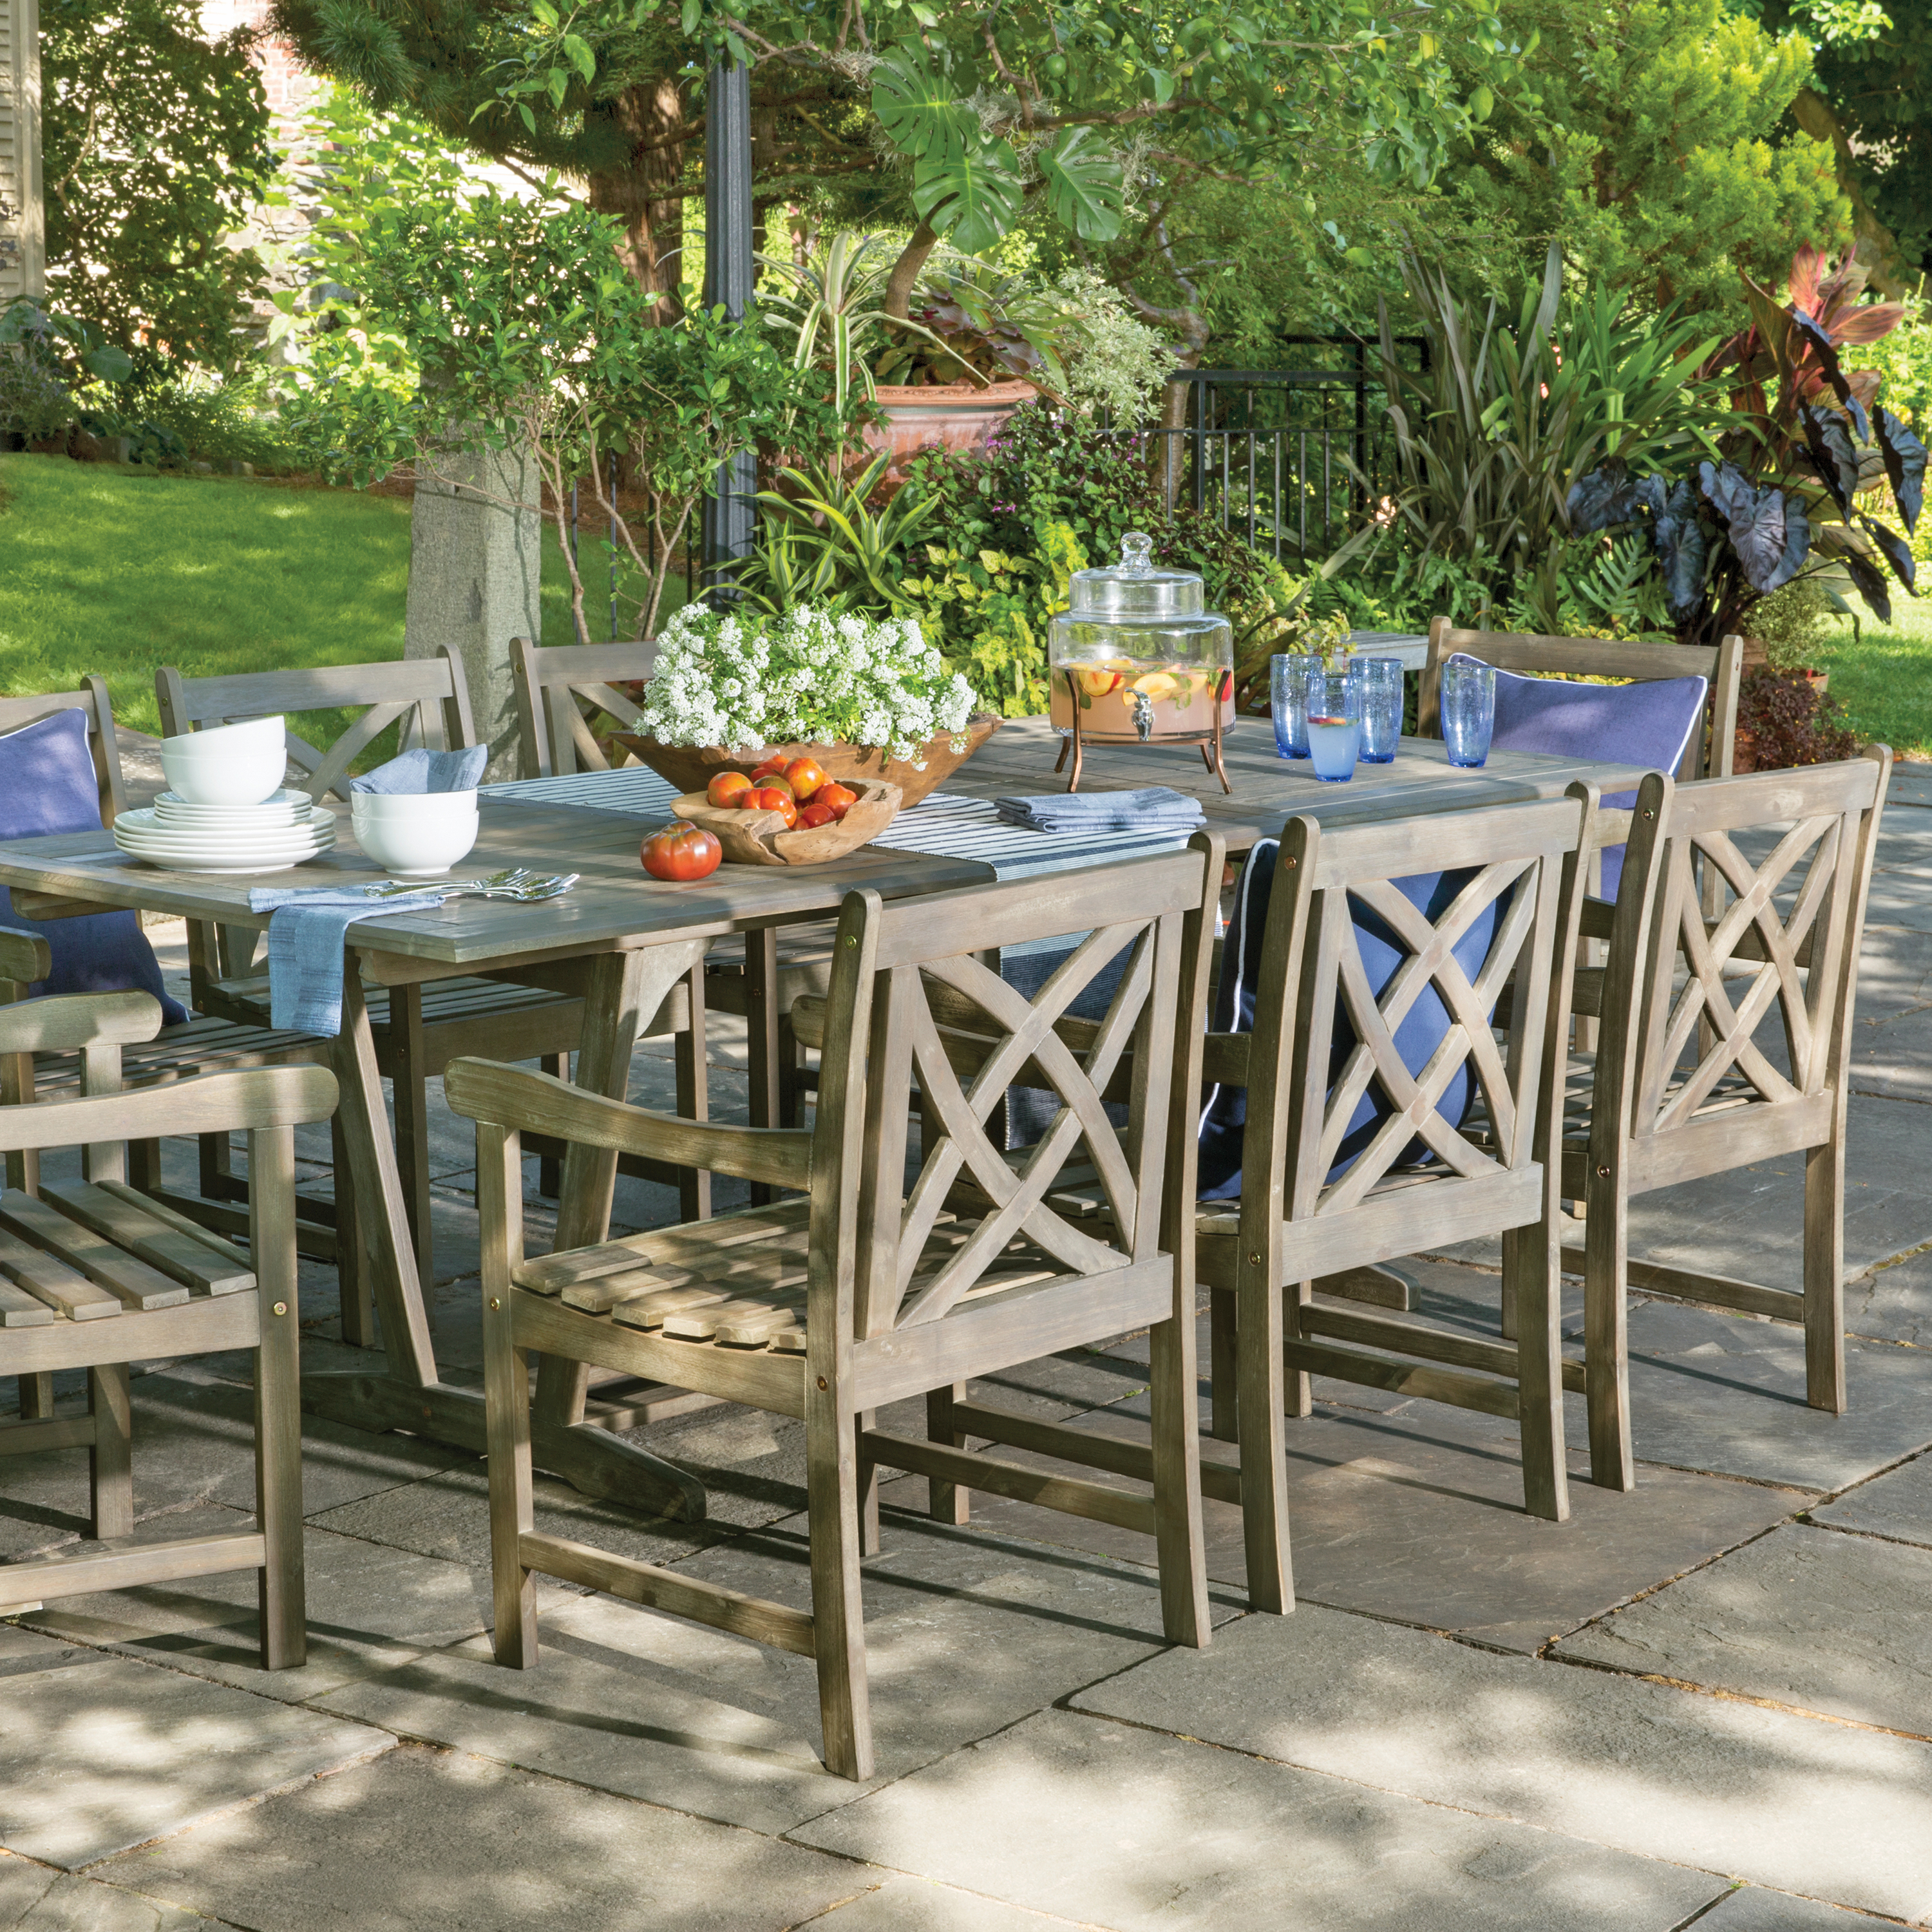 Patio dining sets – Great way to add the new look to your patio